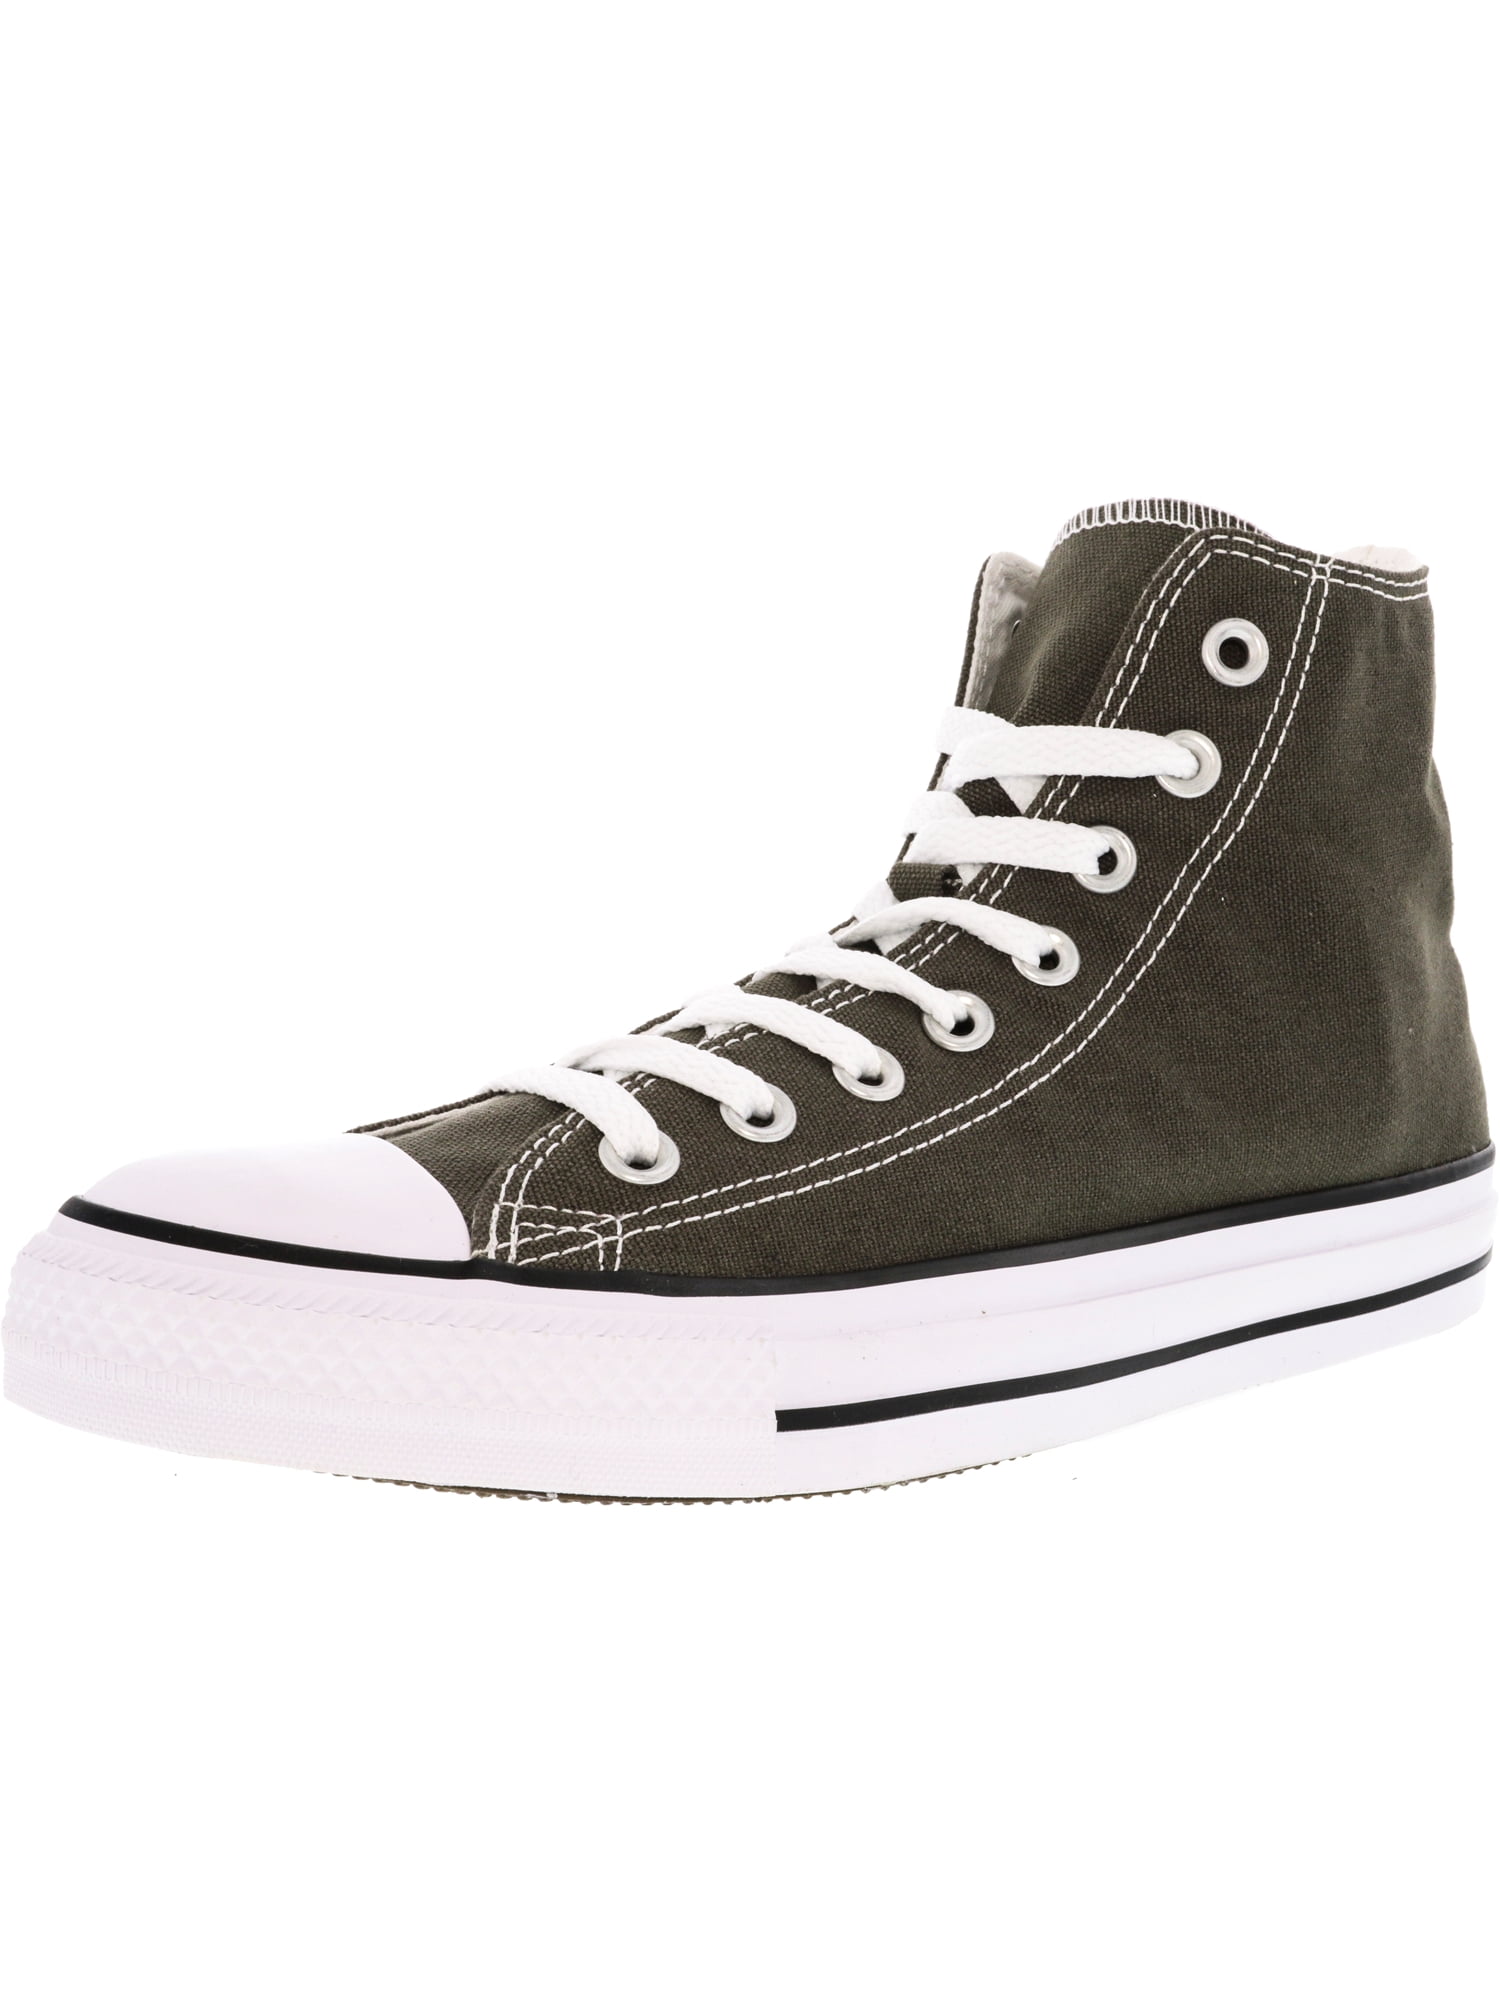 Buy > converse charcoal high > in stock